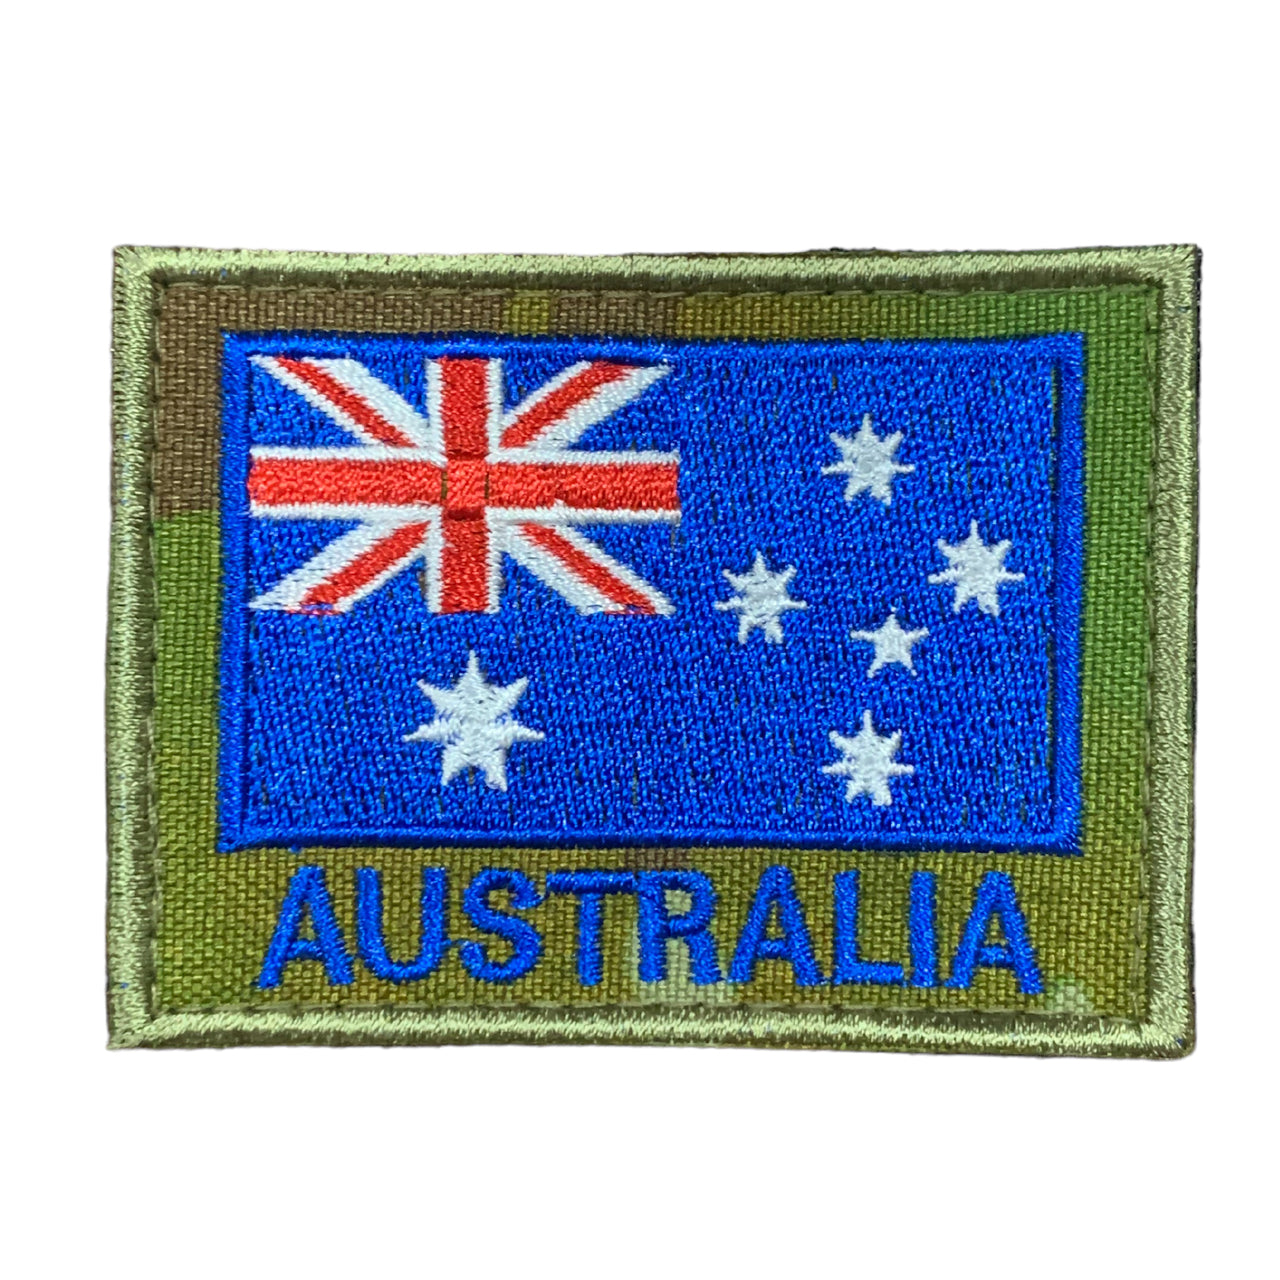 Show off your Australian pride with the ANF Patch! Made with high-quality fabric and a durable Velcro backing, this patch features the iconic Australian National Flag. Measuring 7.5cm x 5.5cm, it's the perfect size to add to any tactical gear or clothing. Please note: this is not made with genuine AMCU fabric, but it's just as impressive! www.defenceqstore.com.au